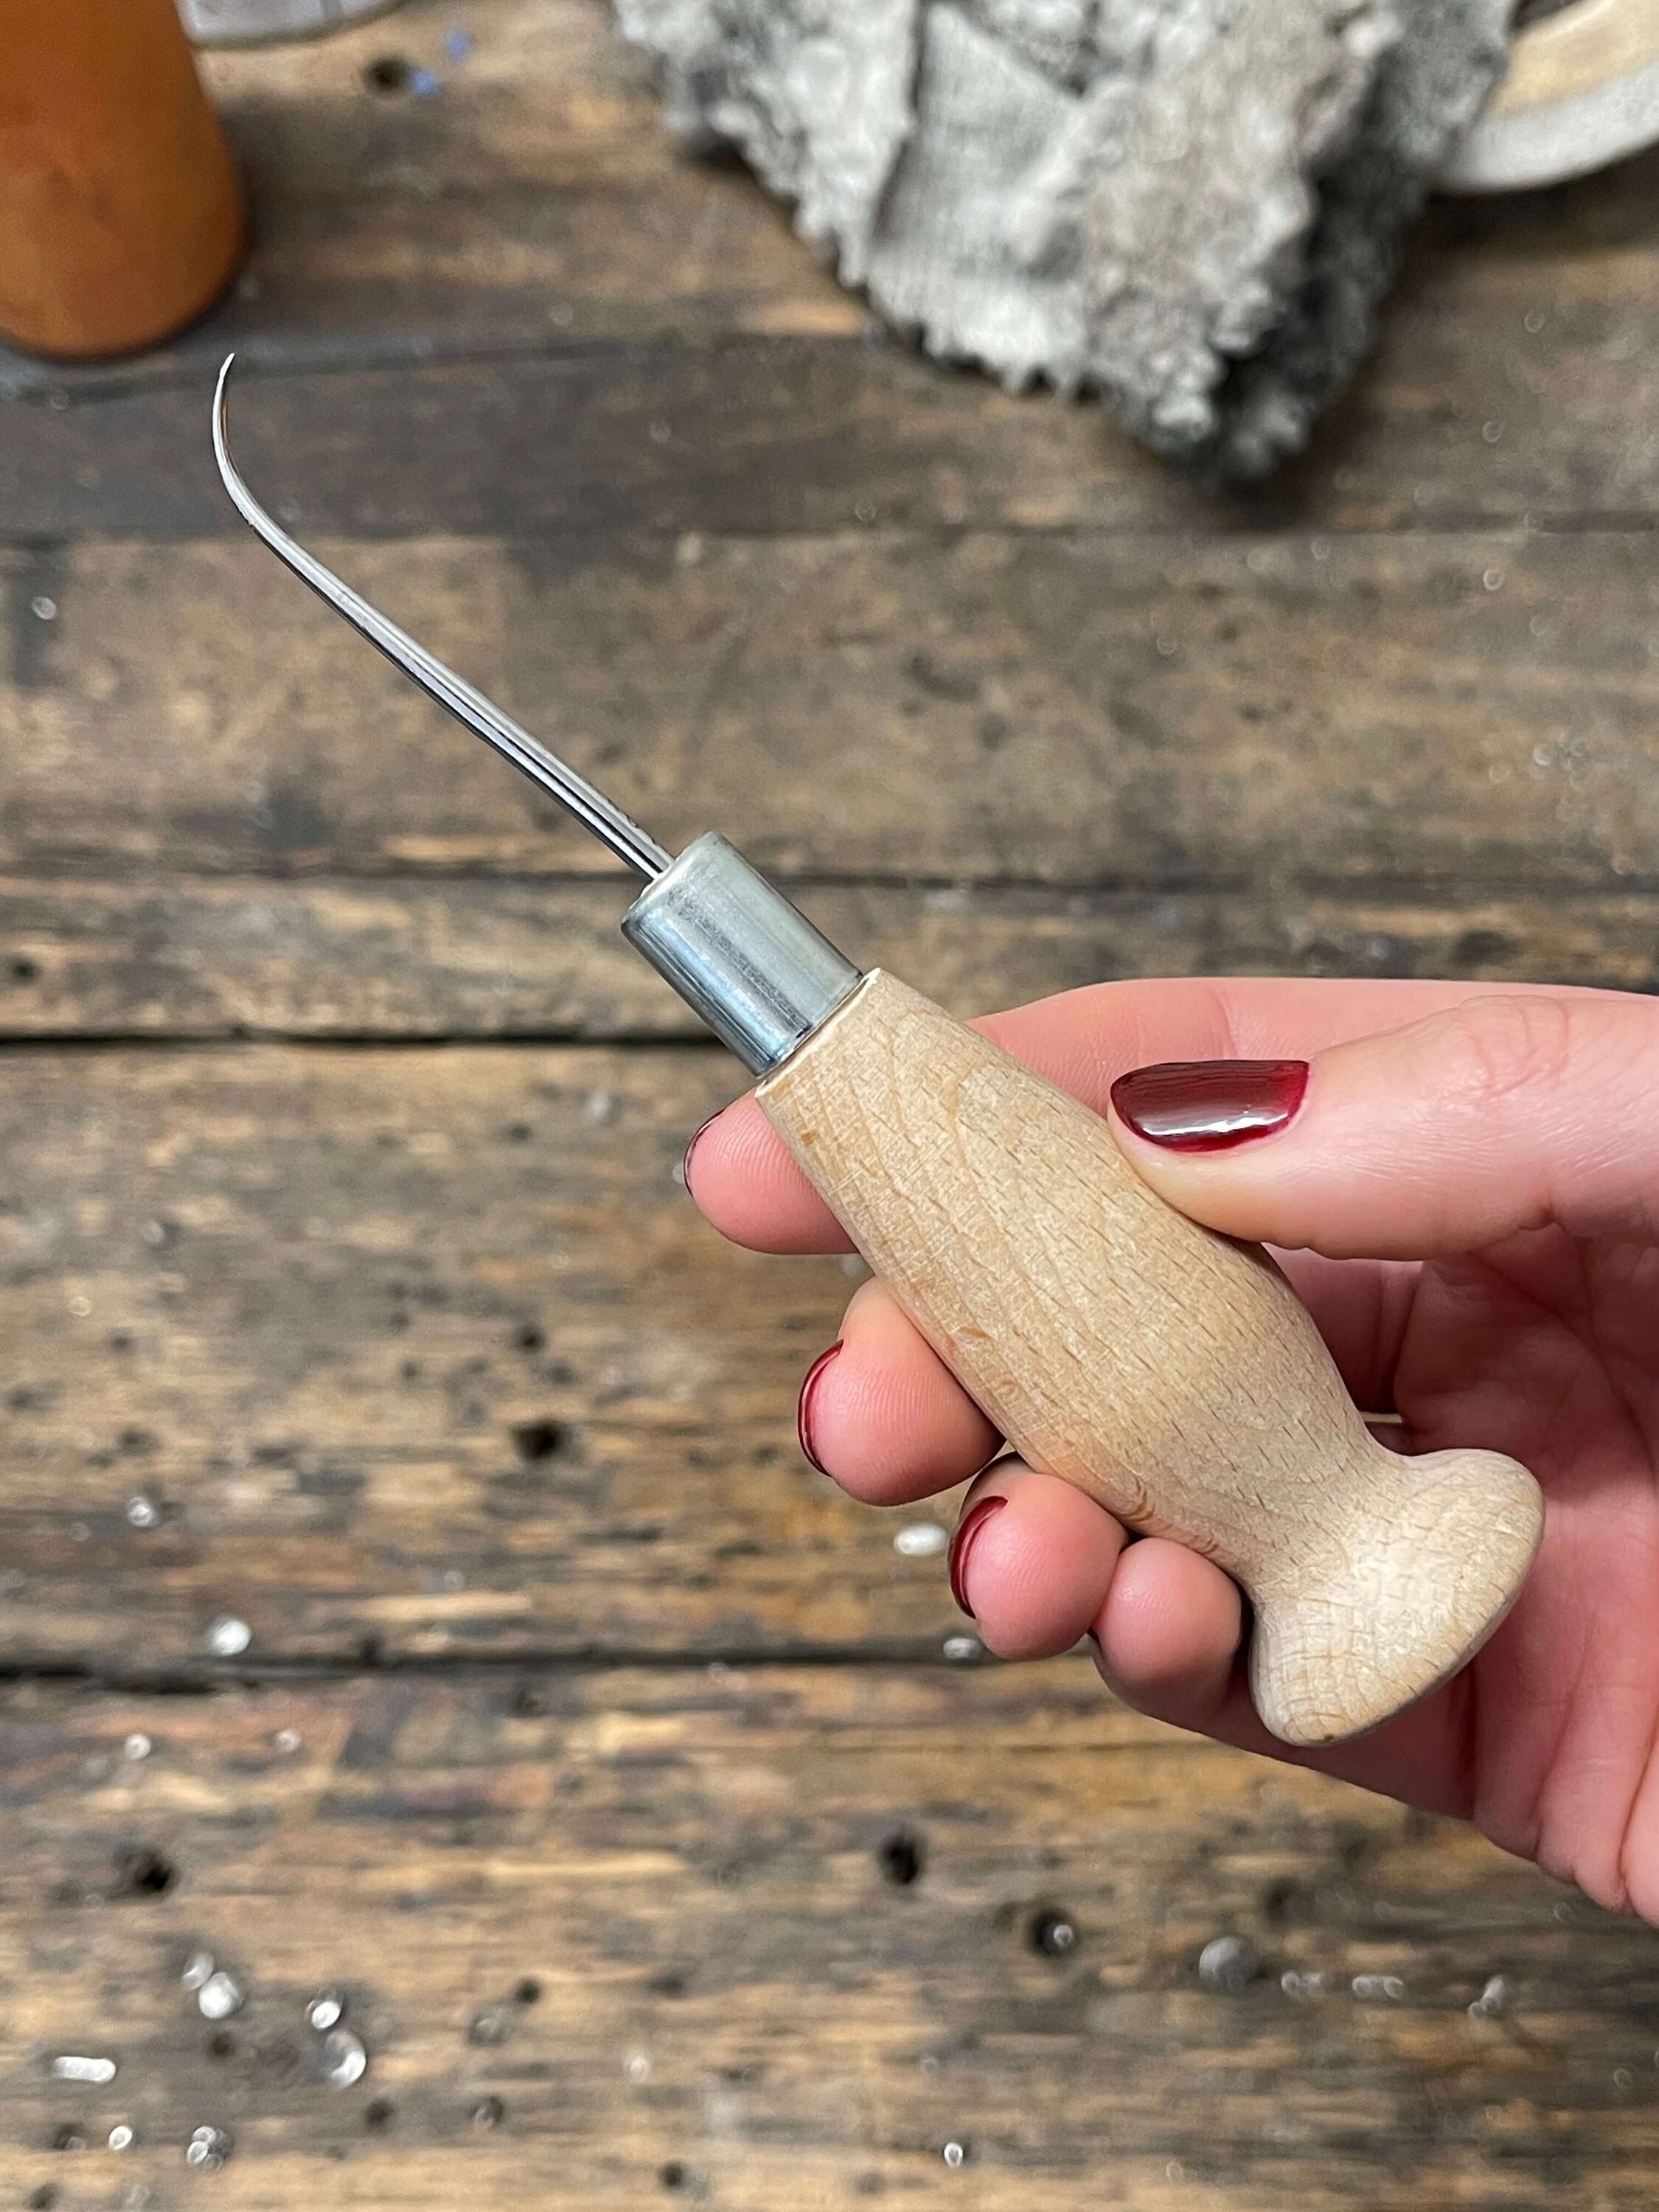 Speedy Stitcher Sewing Awl for sewing or repairing leatherwork, crafts, and  sports equipment.